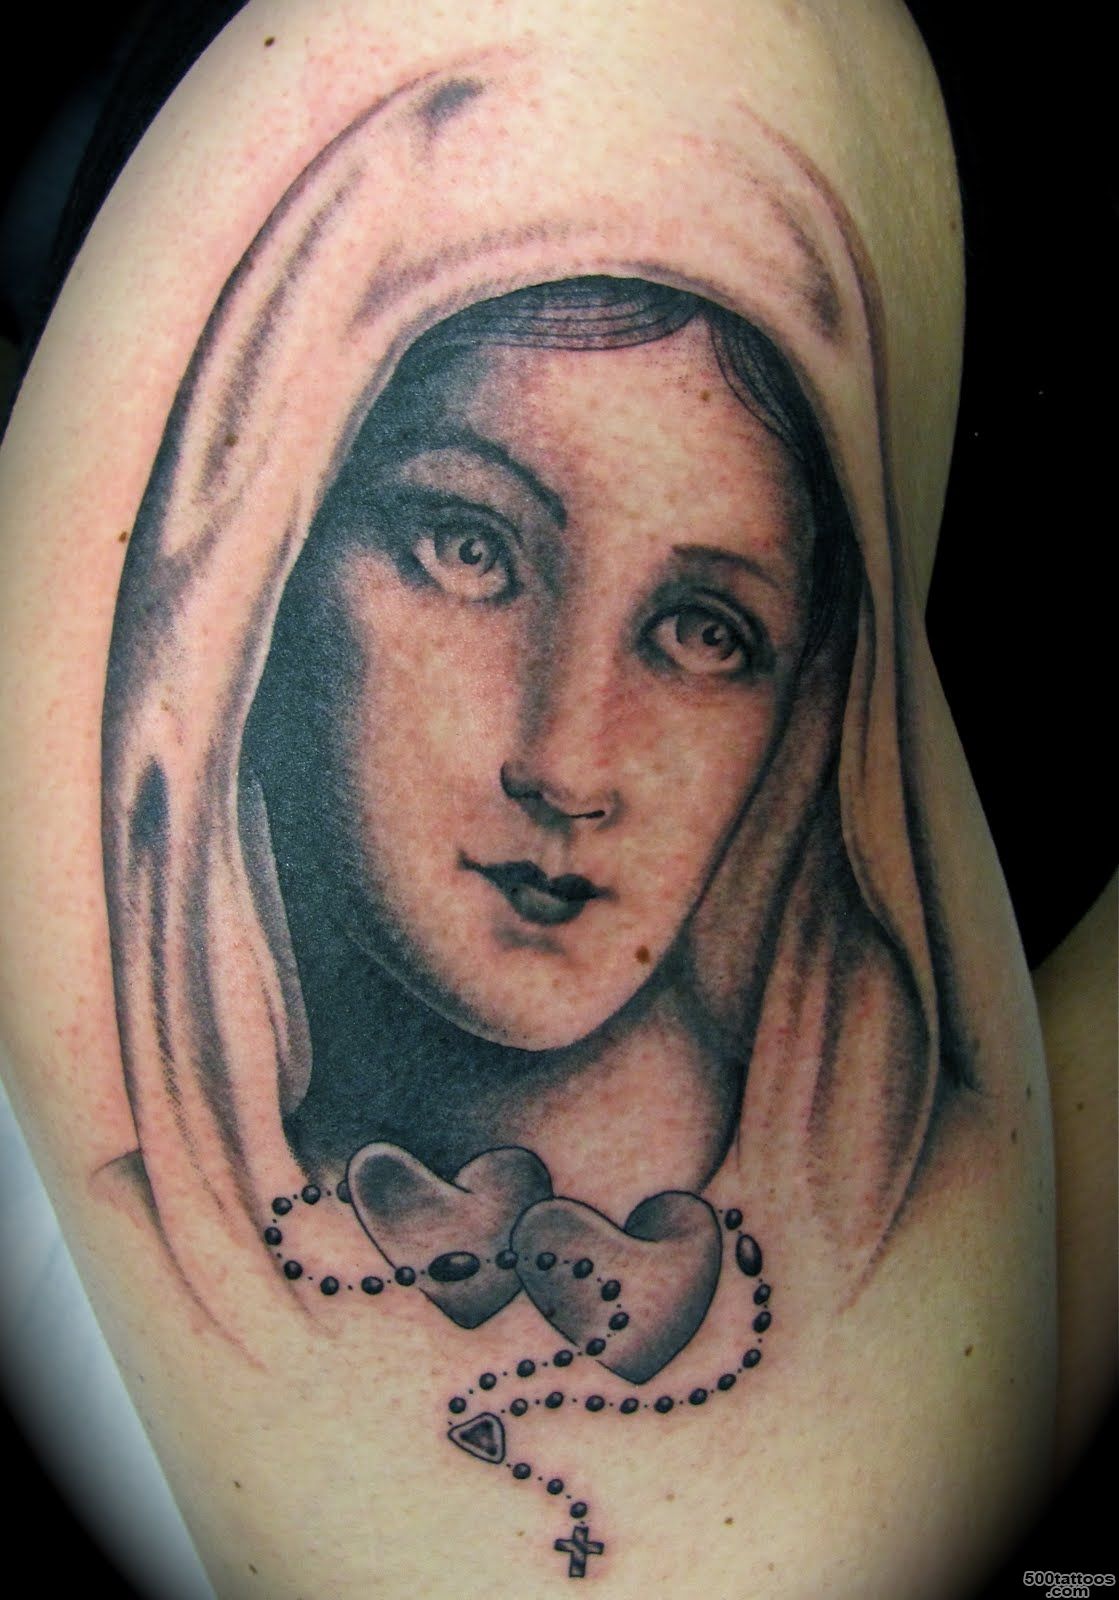 Top Mary Stained Glass Tattoo Images for Pinterest Tattoos_35.JPG